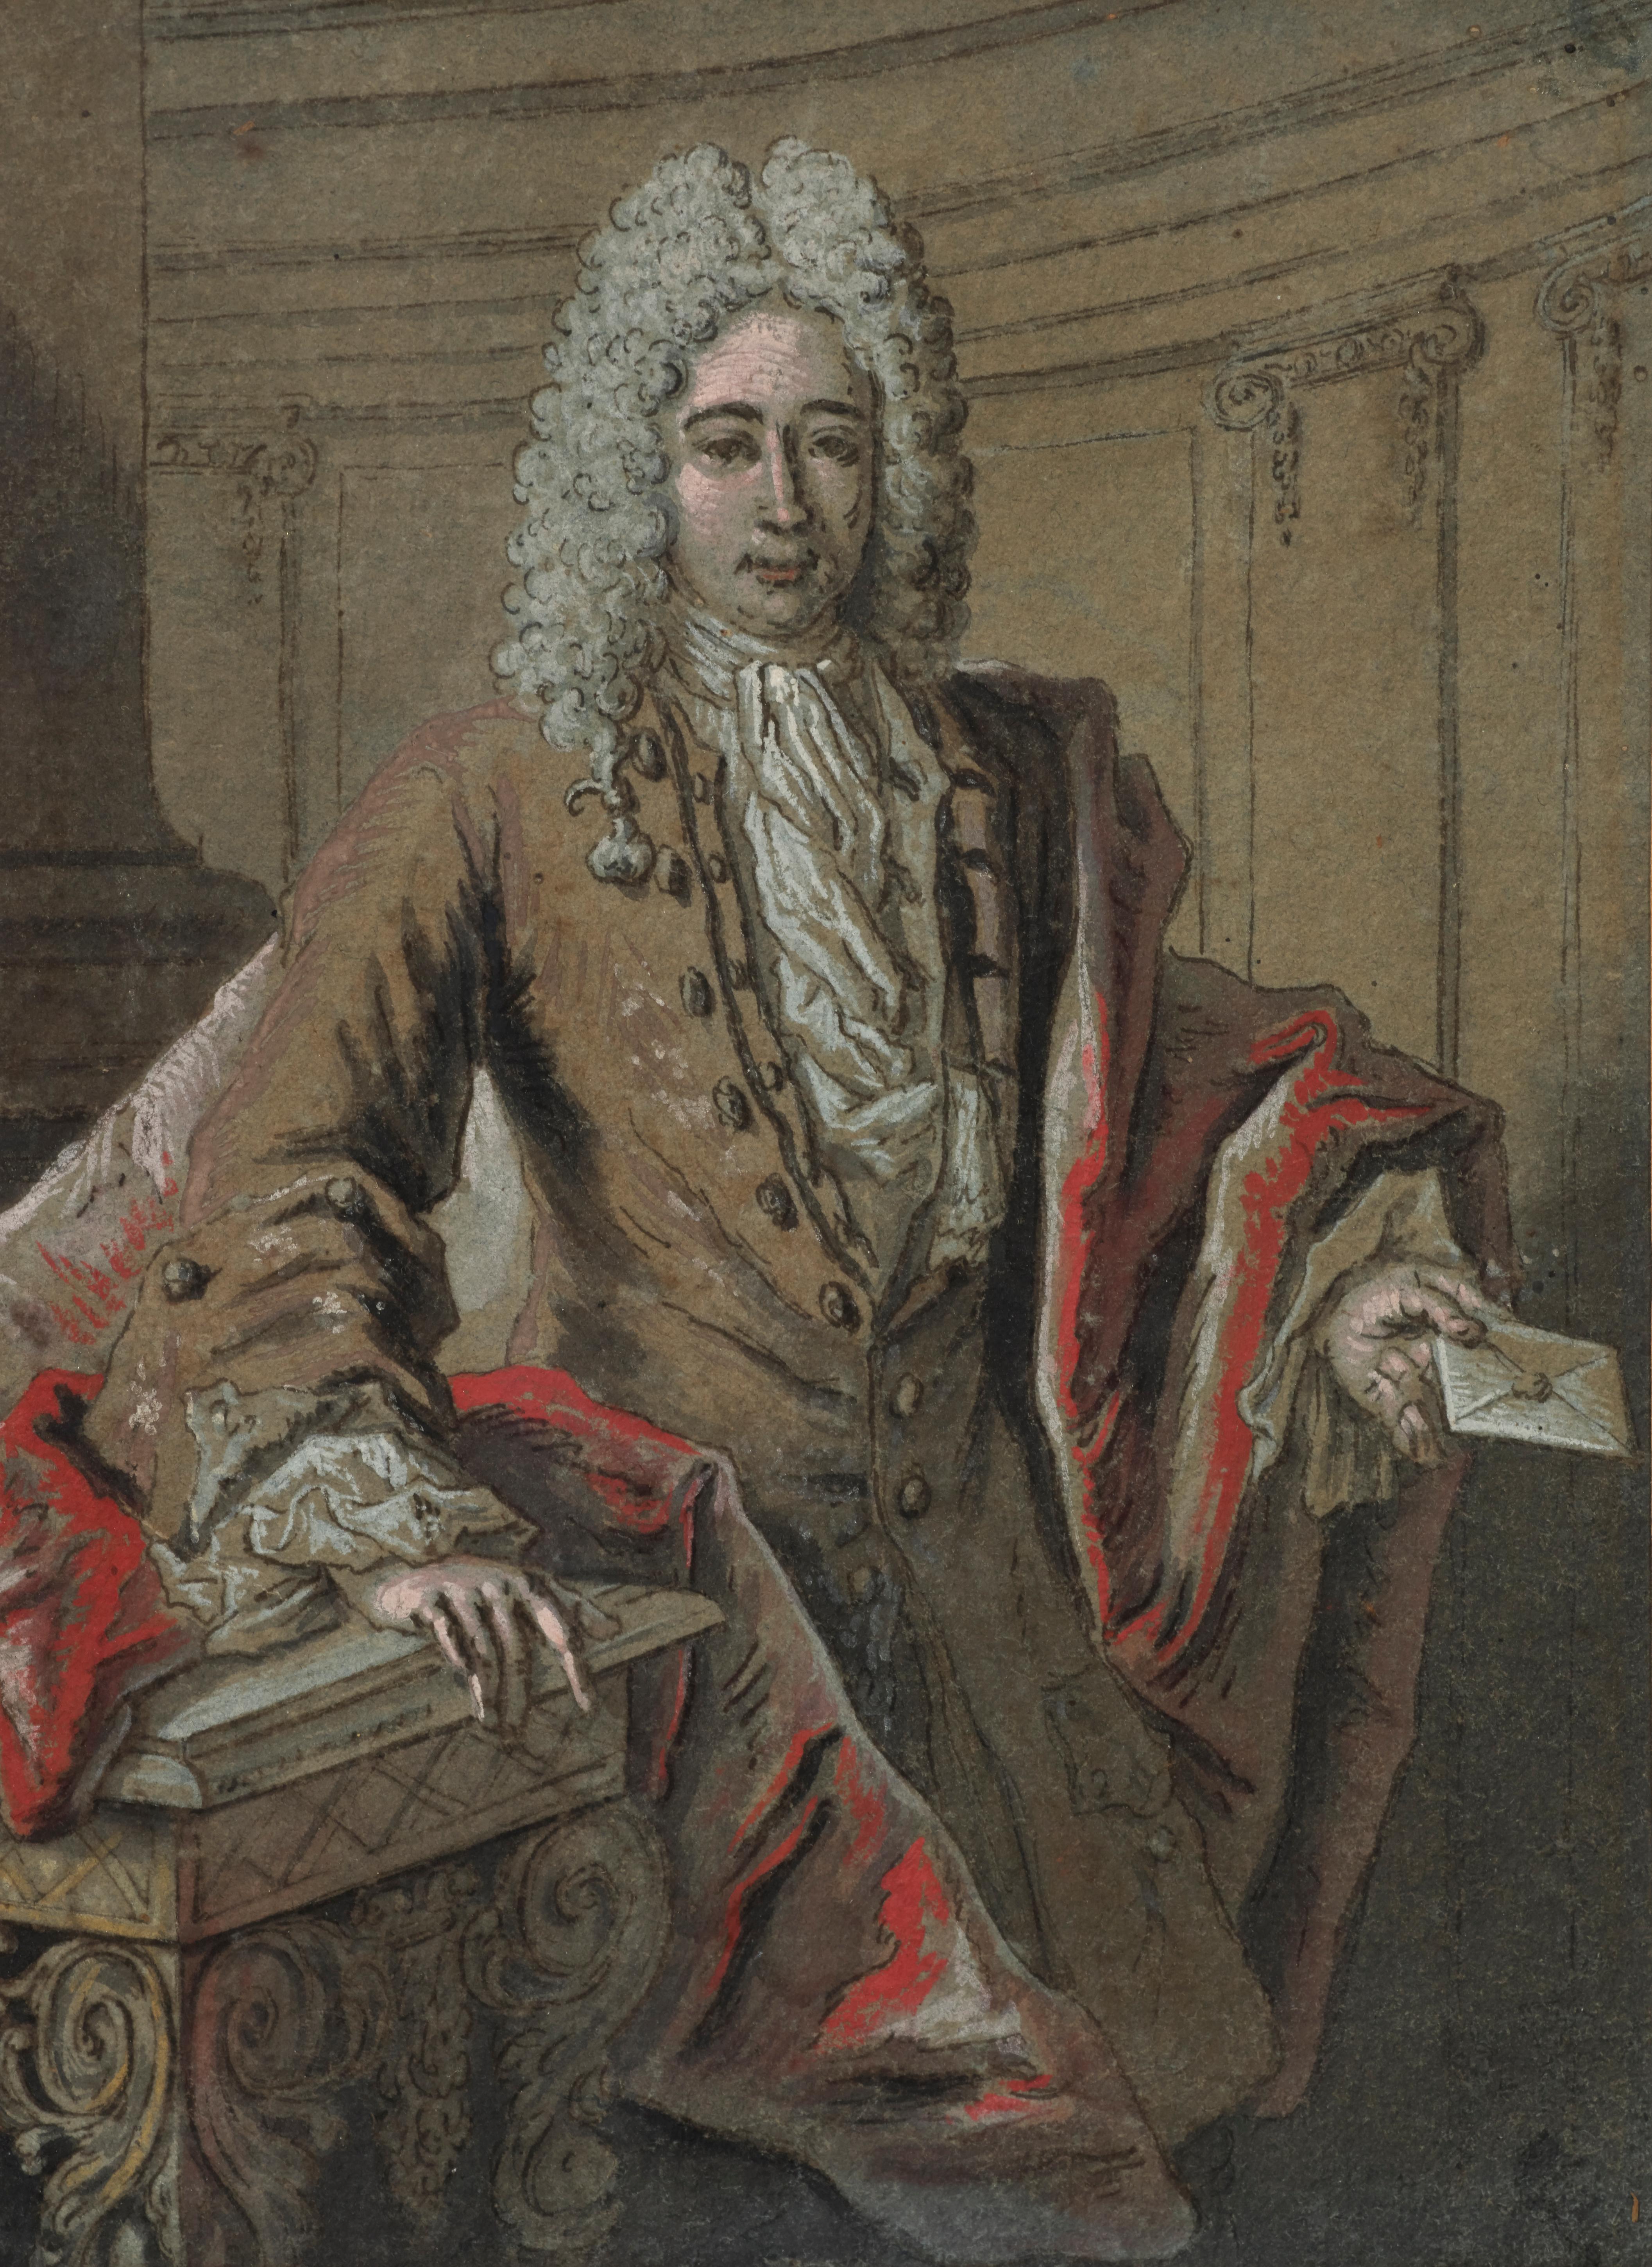 Portrait of a Man Holding a Letter Drawing by Jean-Baptiste Oudry - 18th century